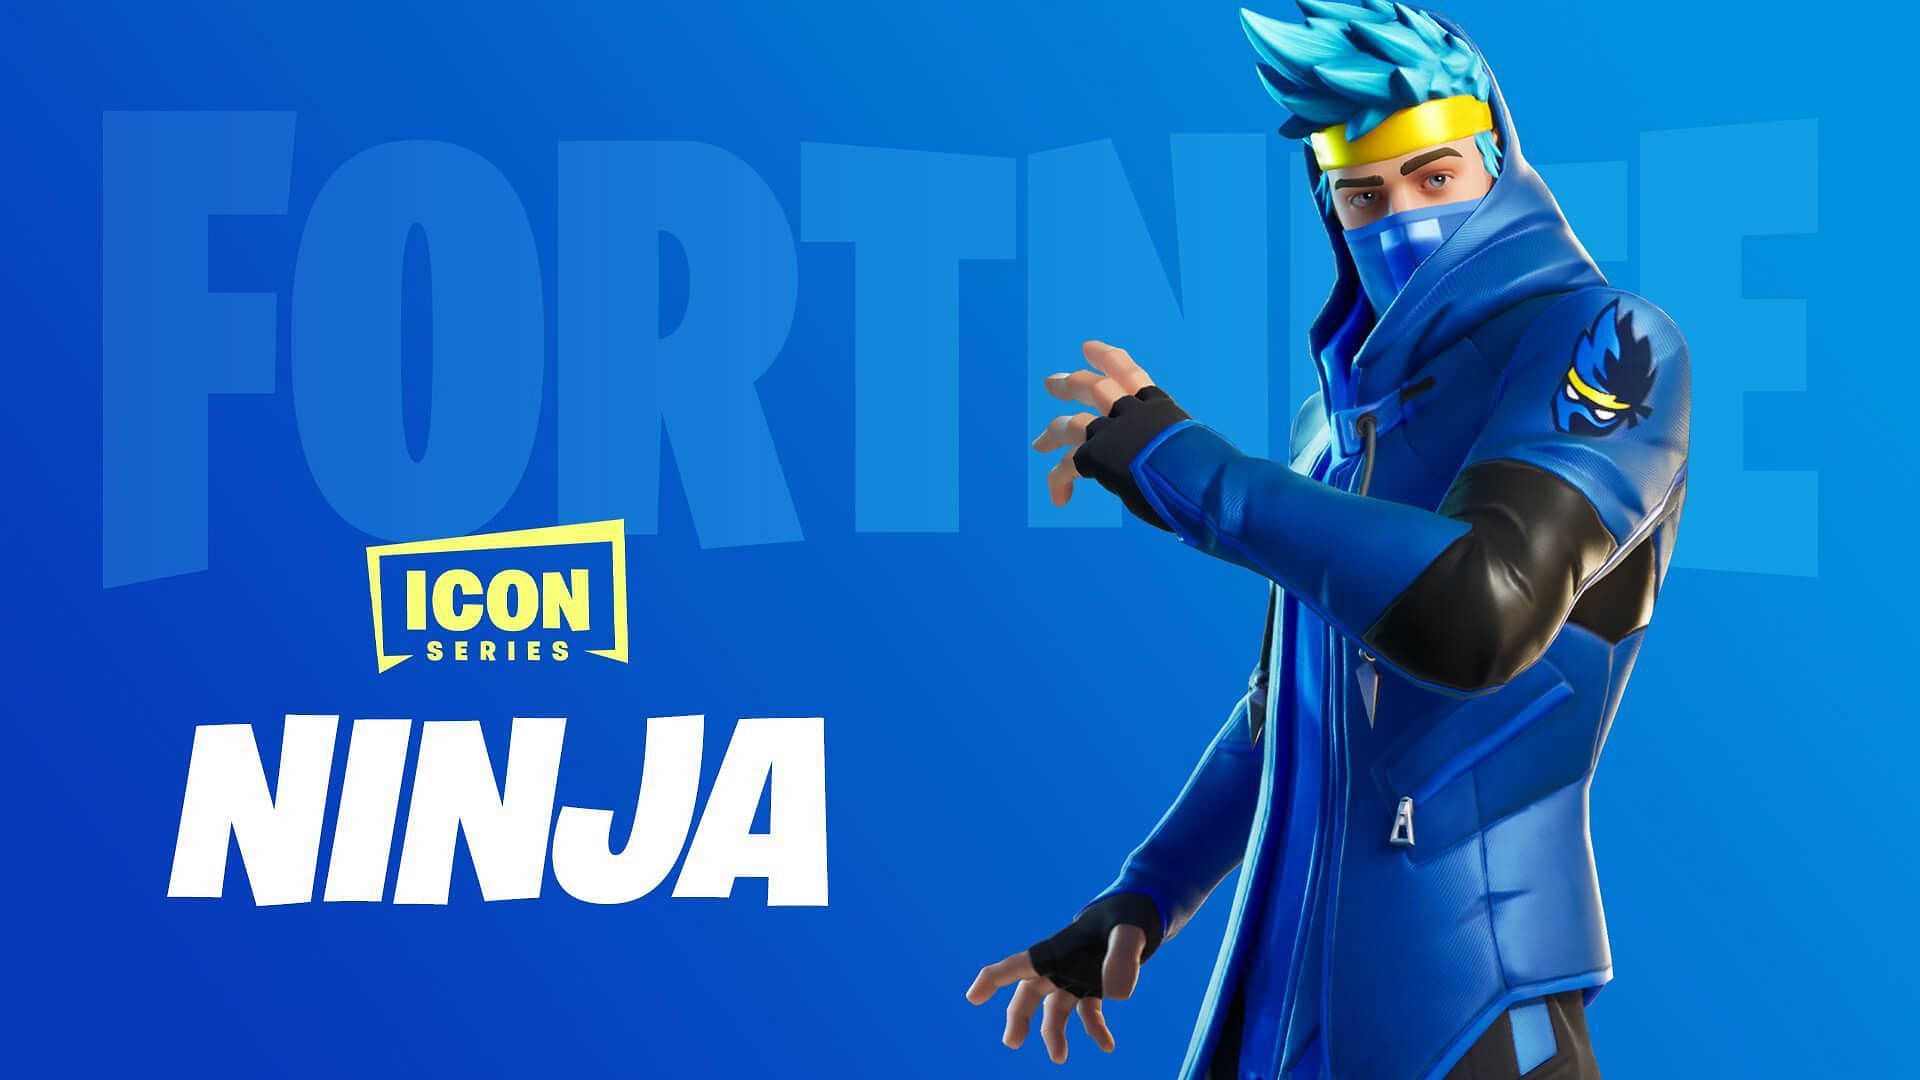 Ninja was one of the first ICON skins (Image via Epic Games)